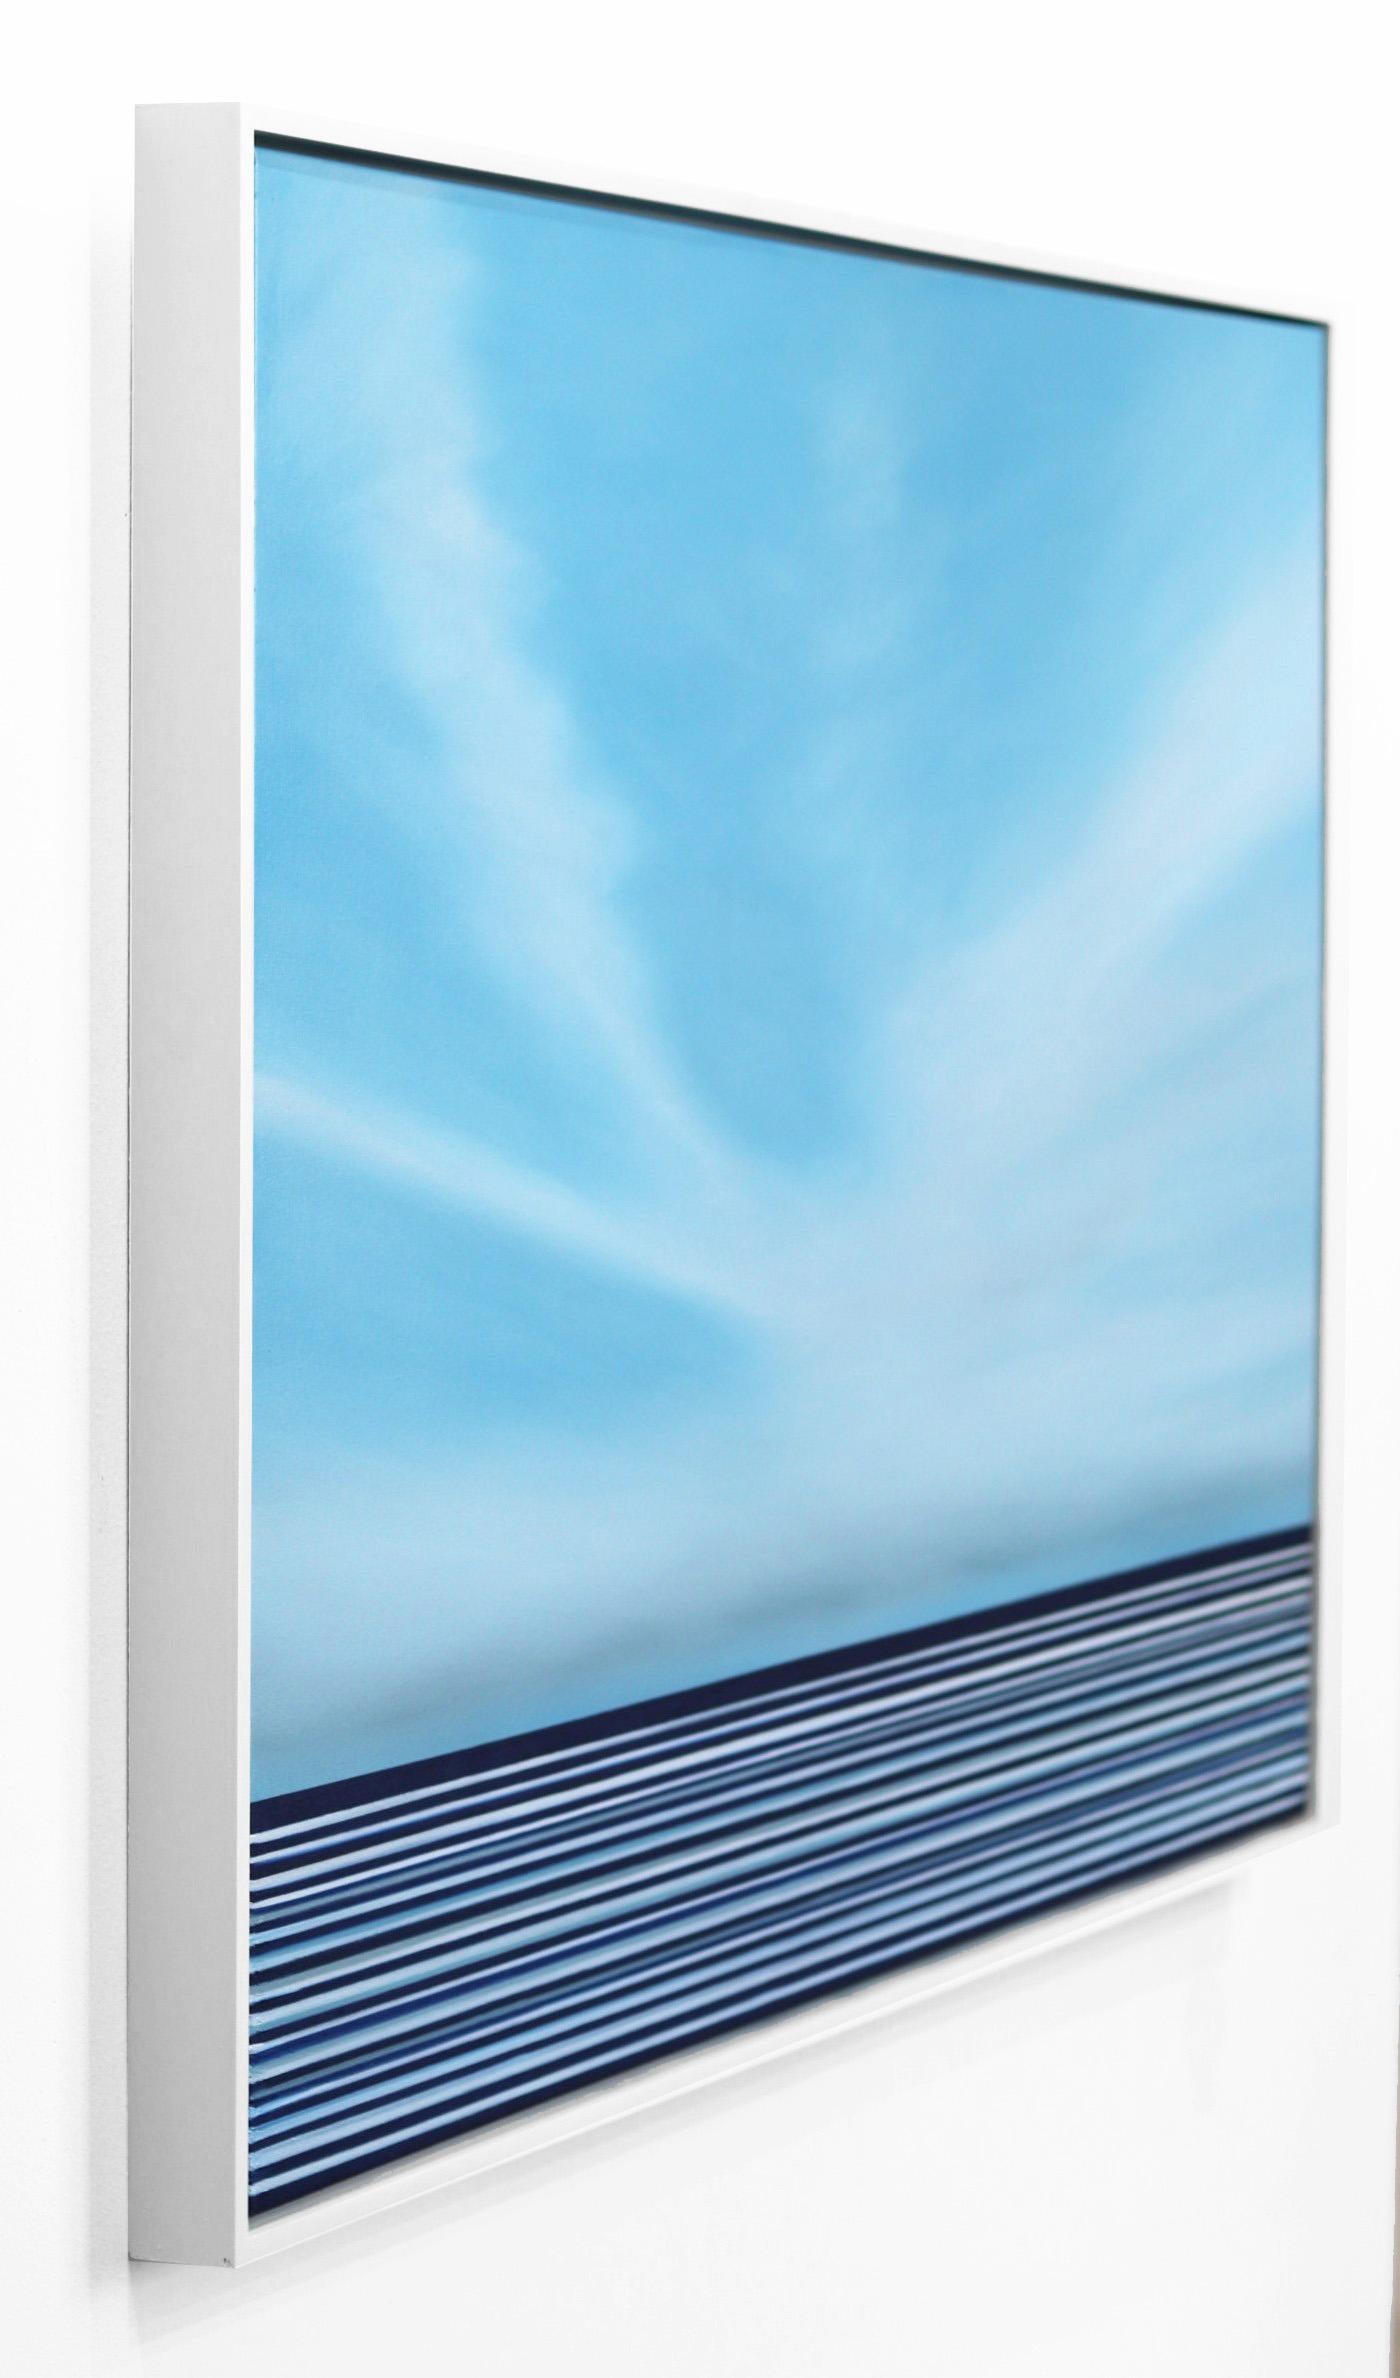 Untitled No. 763 - Framed Contemporary Minimalist Blue Artwork For Sale 2